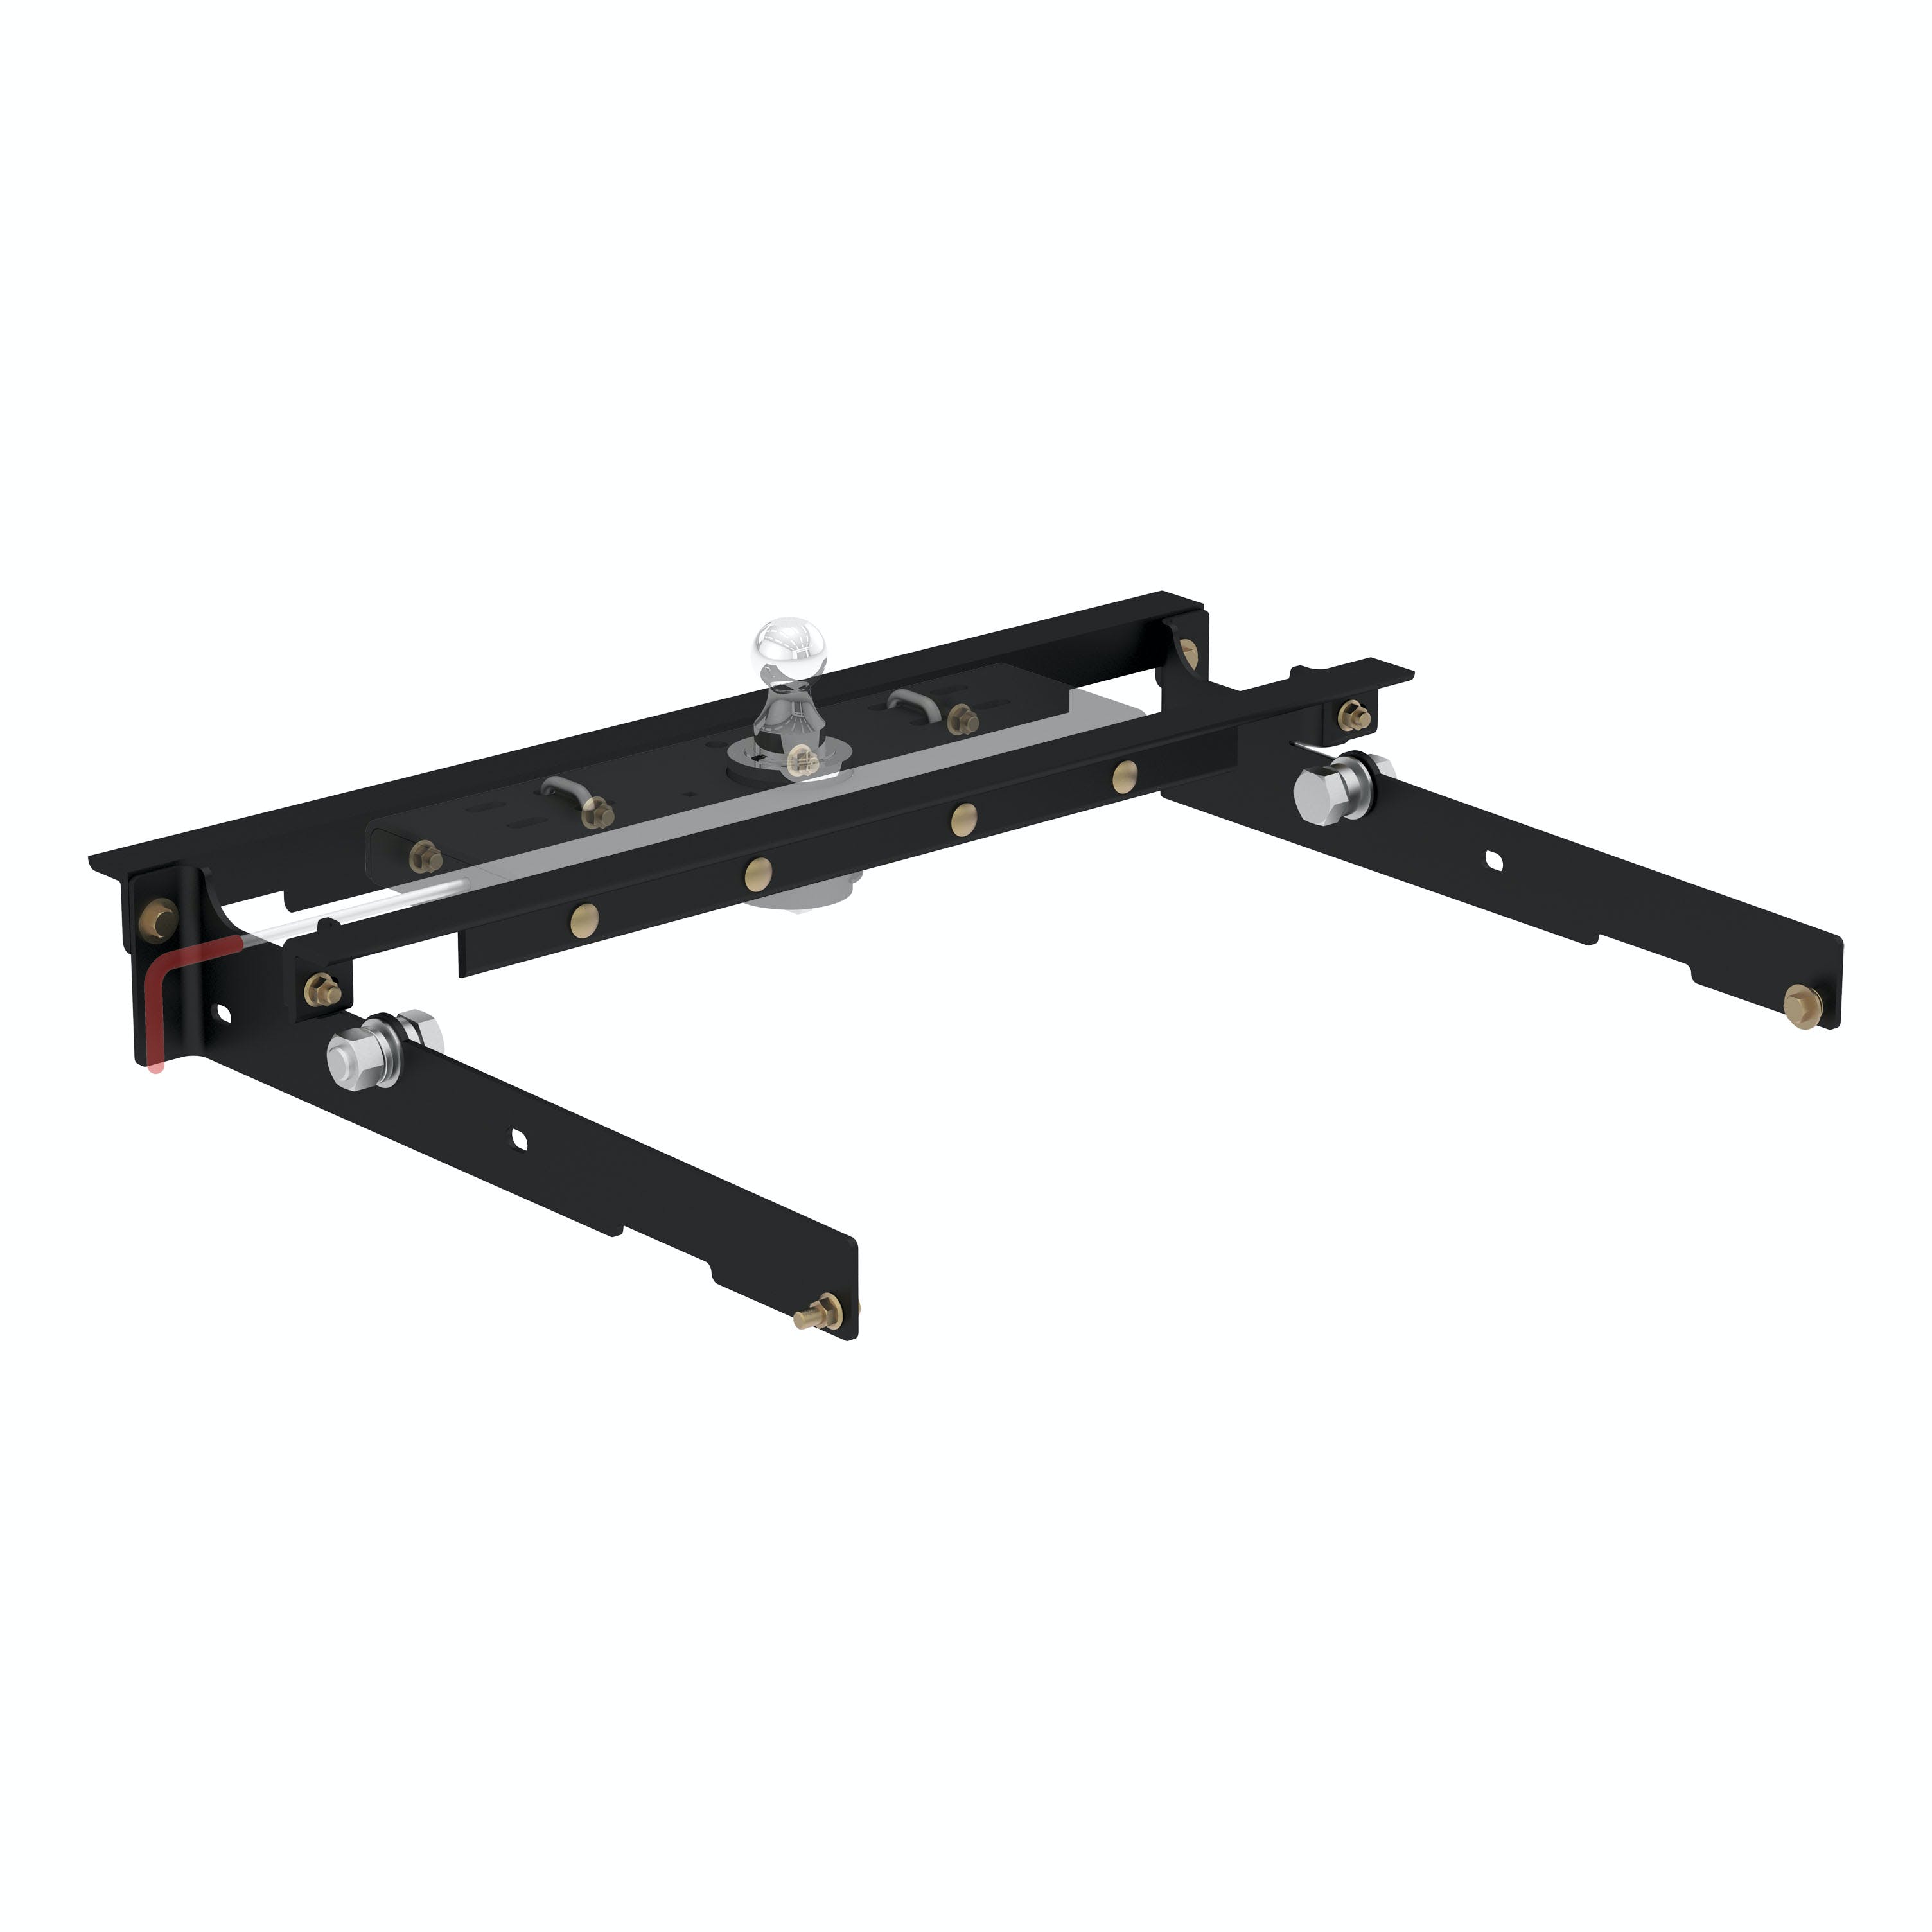 CURT 60723 Double Lock Gooseneck Hitch Kit with Brackets, Select Ford F-150, F-250, F-350